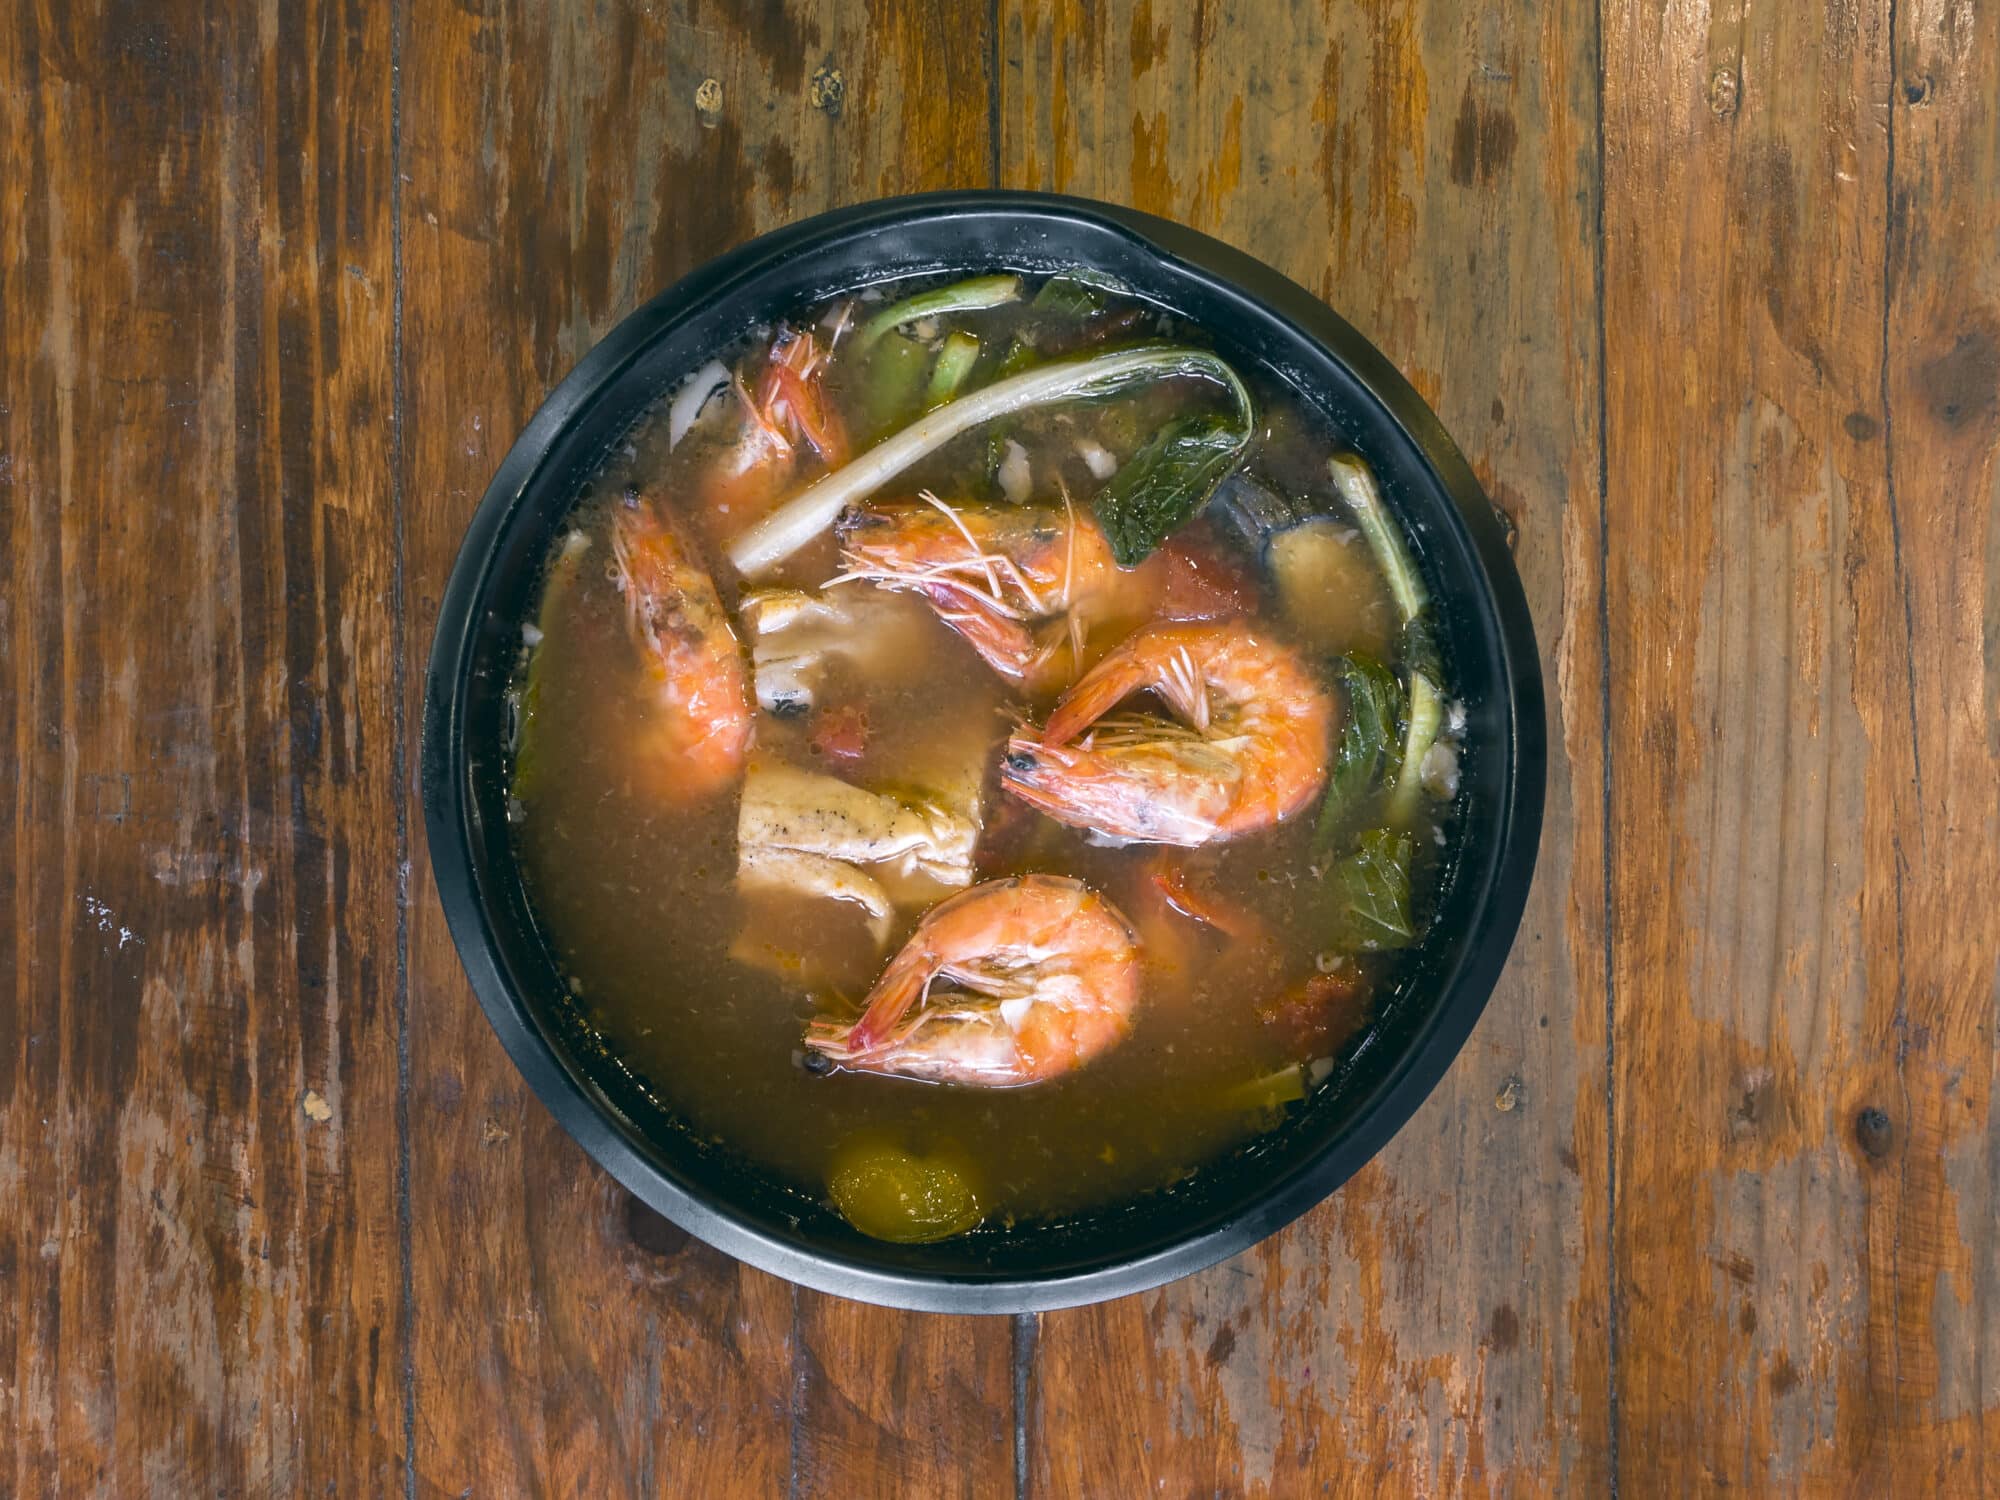 Sinigang na Hipon is a type of Filipino sour tamarind soup. Top view, on a wood table.